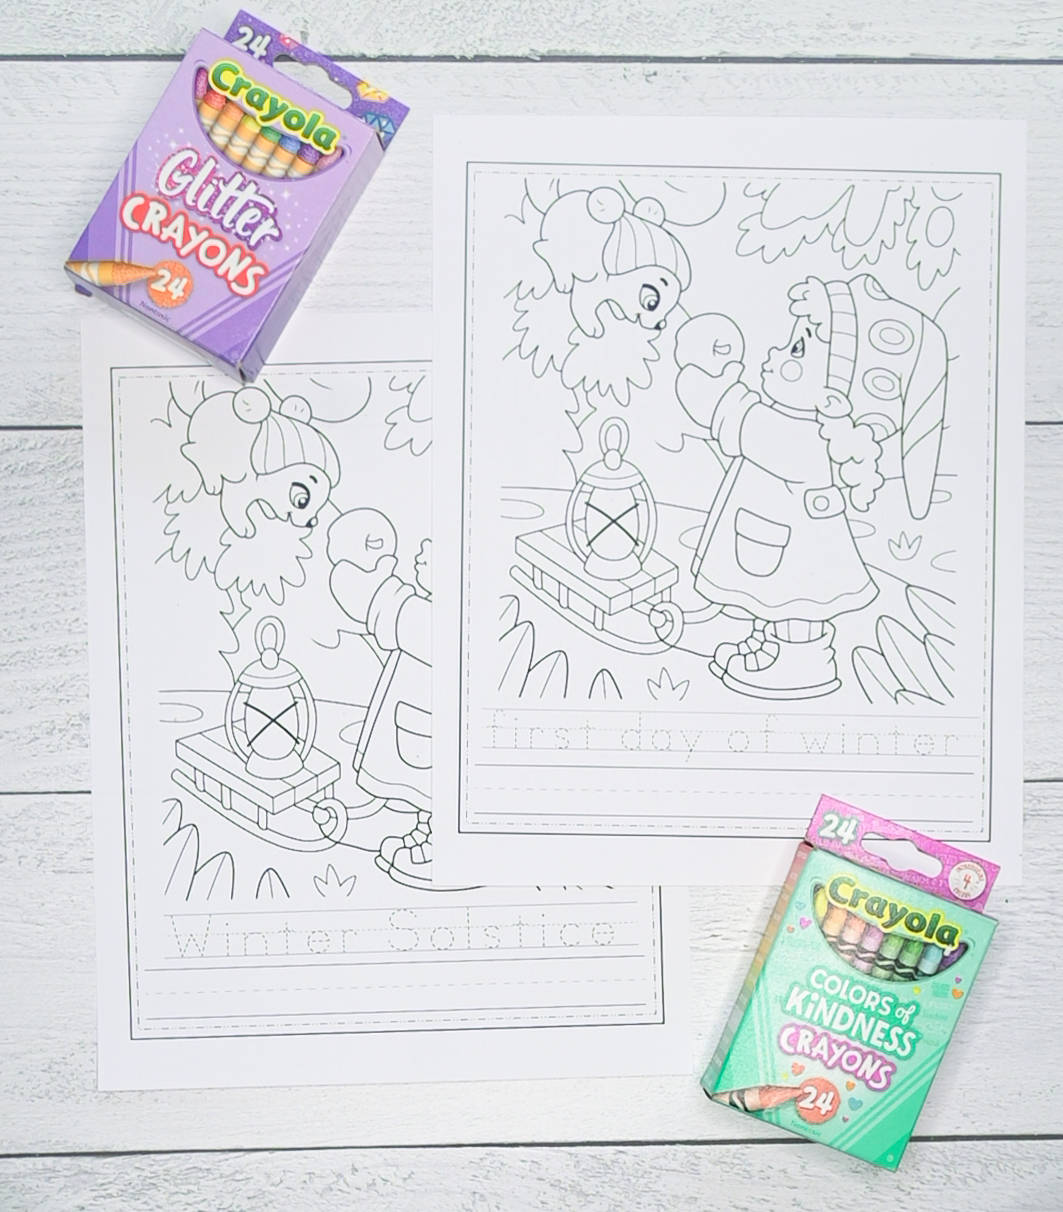 A top down photo of two printable worksheets. Each worksheet has a winter scene to color and words to trade. One says "first day of winter" and the other "Winter Solstice." The pages are shown with two boxes of crayons.